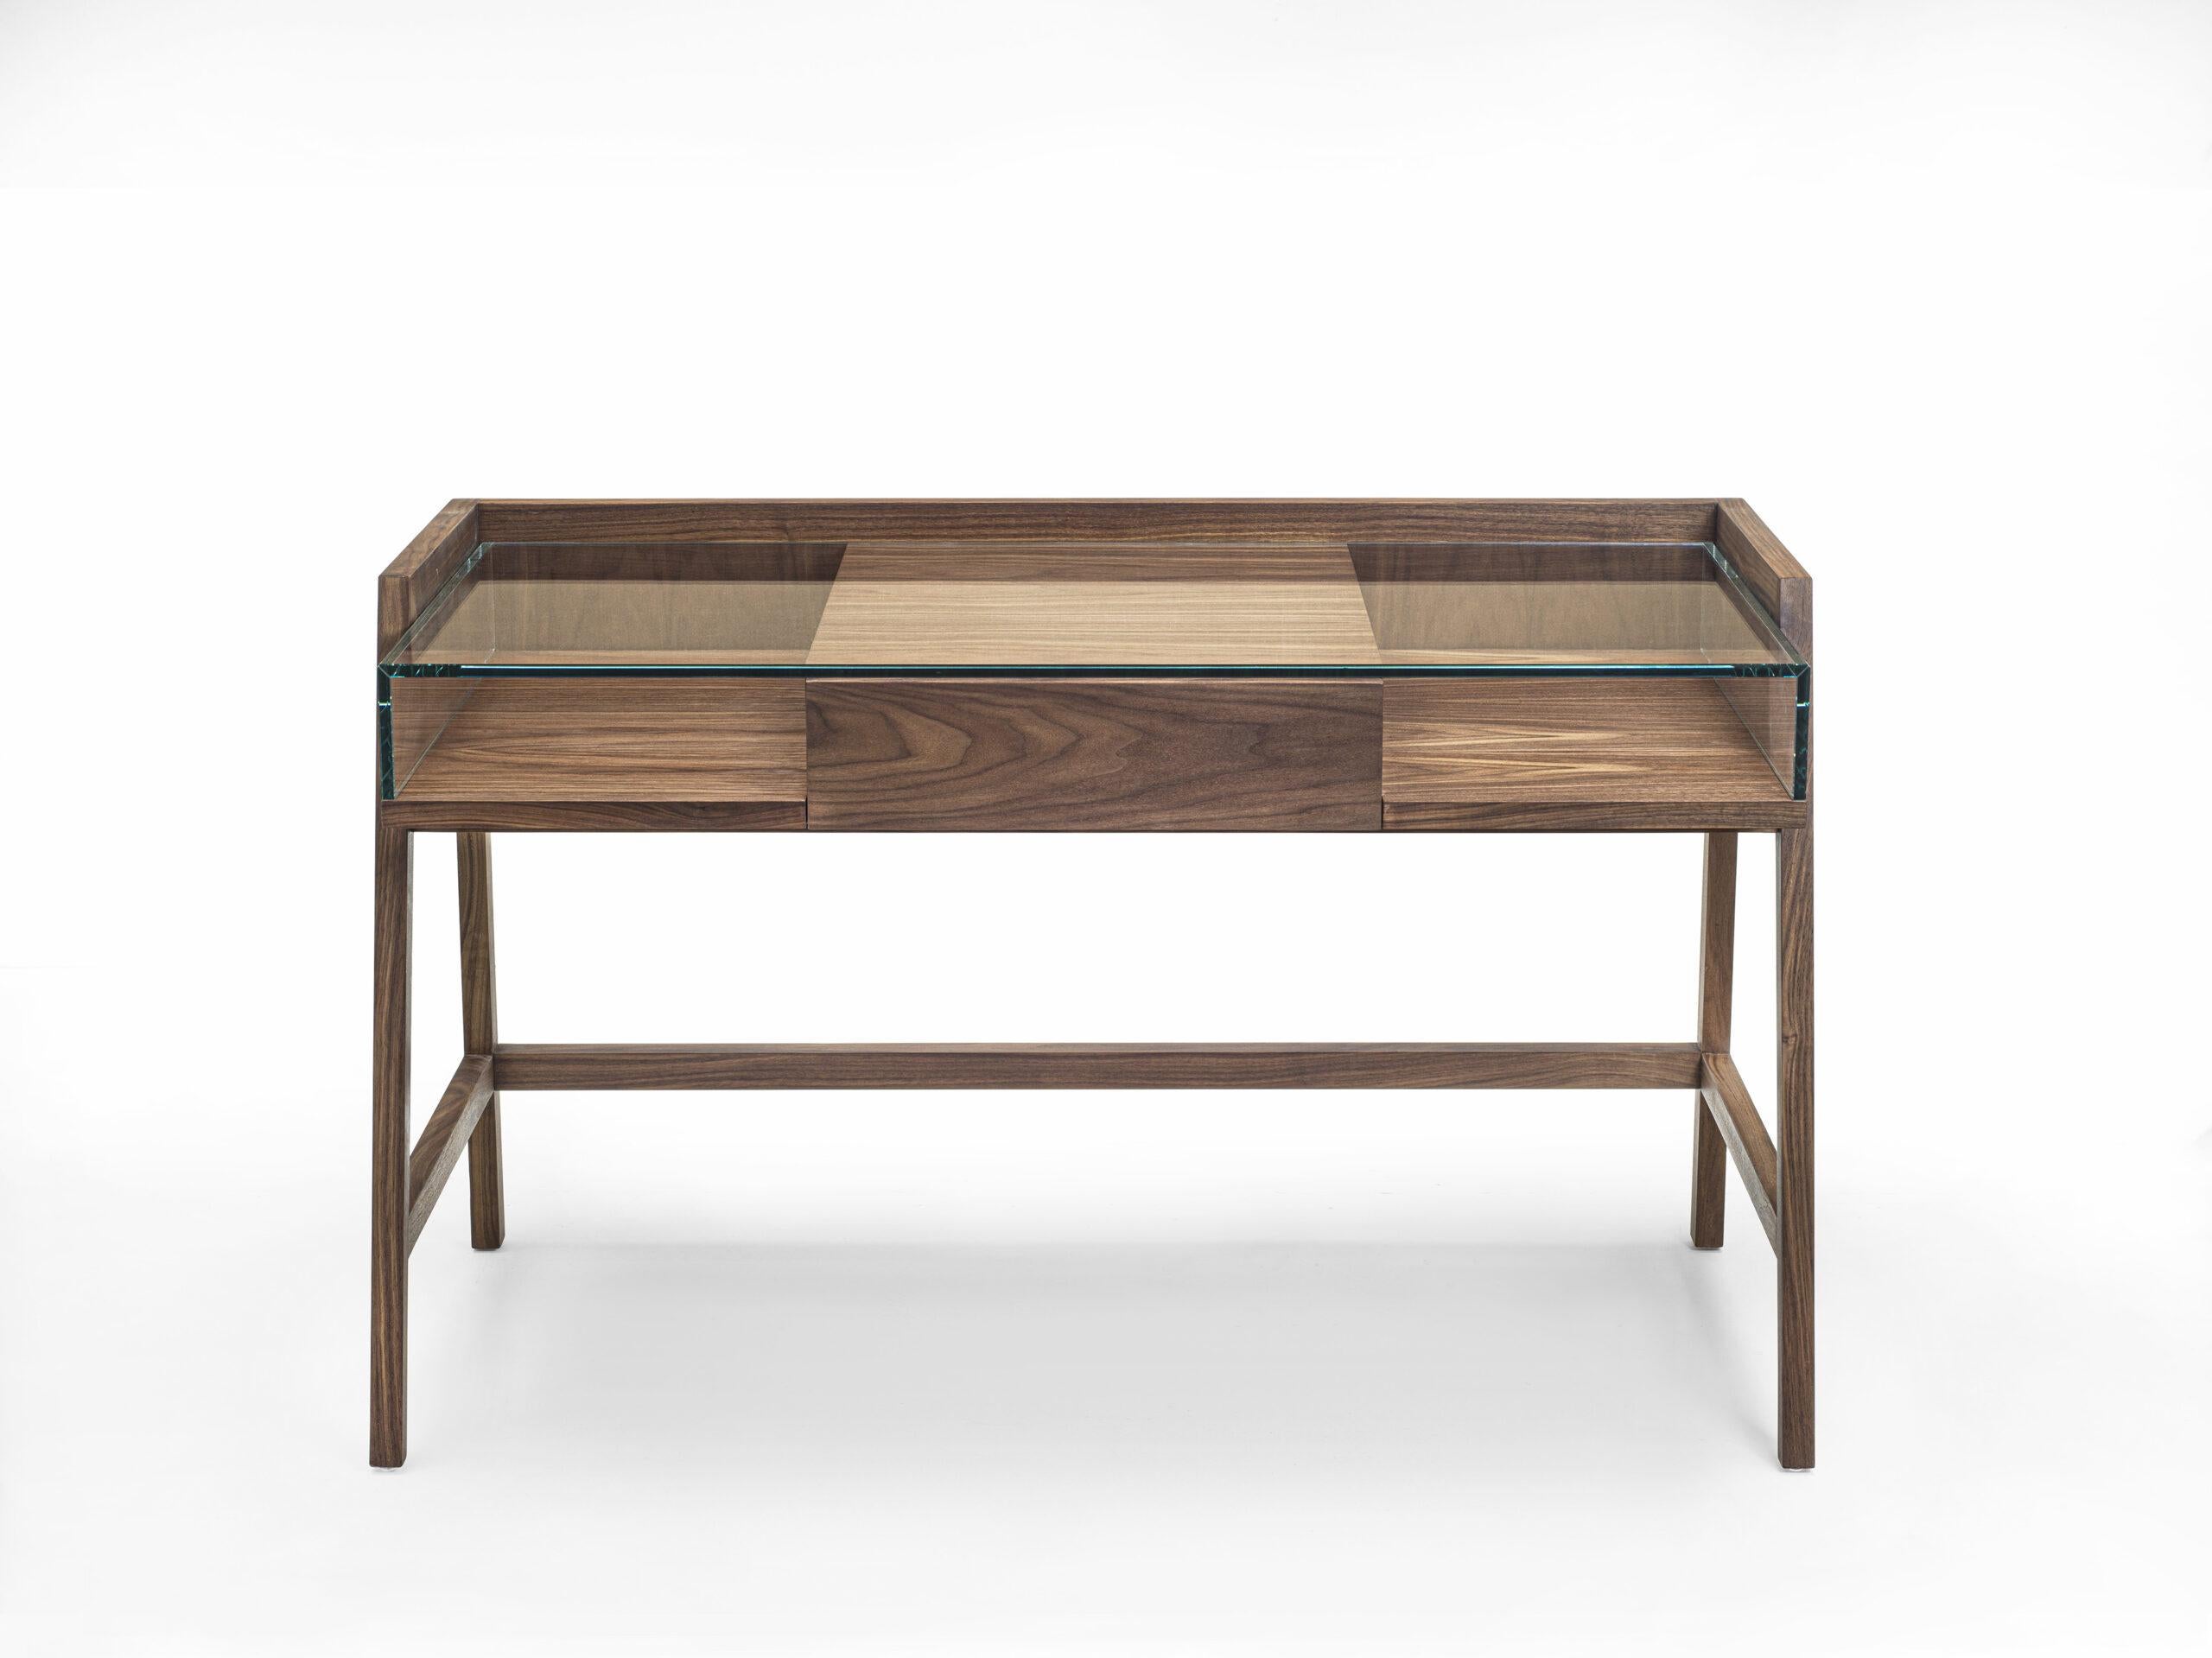 Writing desk with squared lines, with structure made of blockboard and solid wood and glass top. Equipped with a central drawer assembled with dovetail joints.

Available Finishes:
Walnut or Oak (with or without knots)
Glass: Clear, Satin,